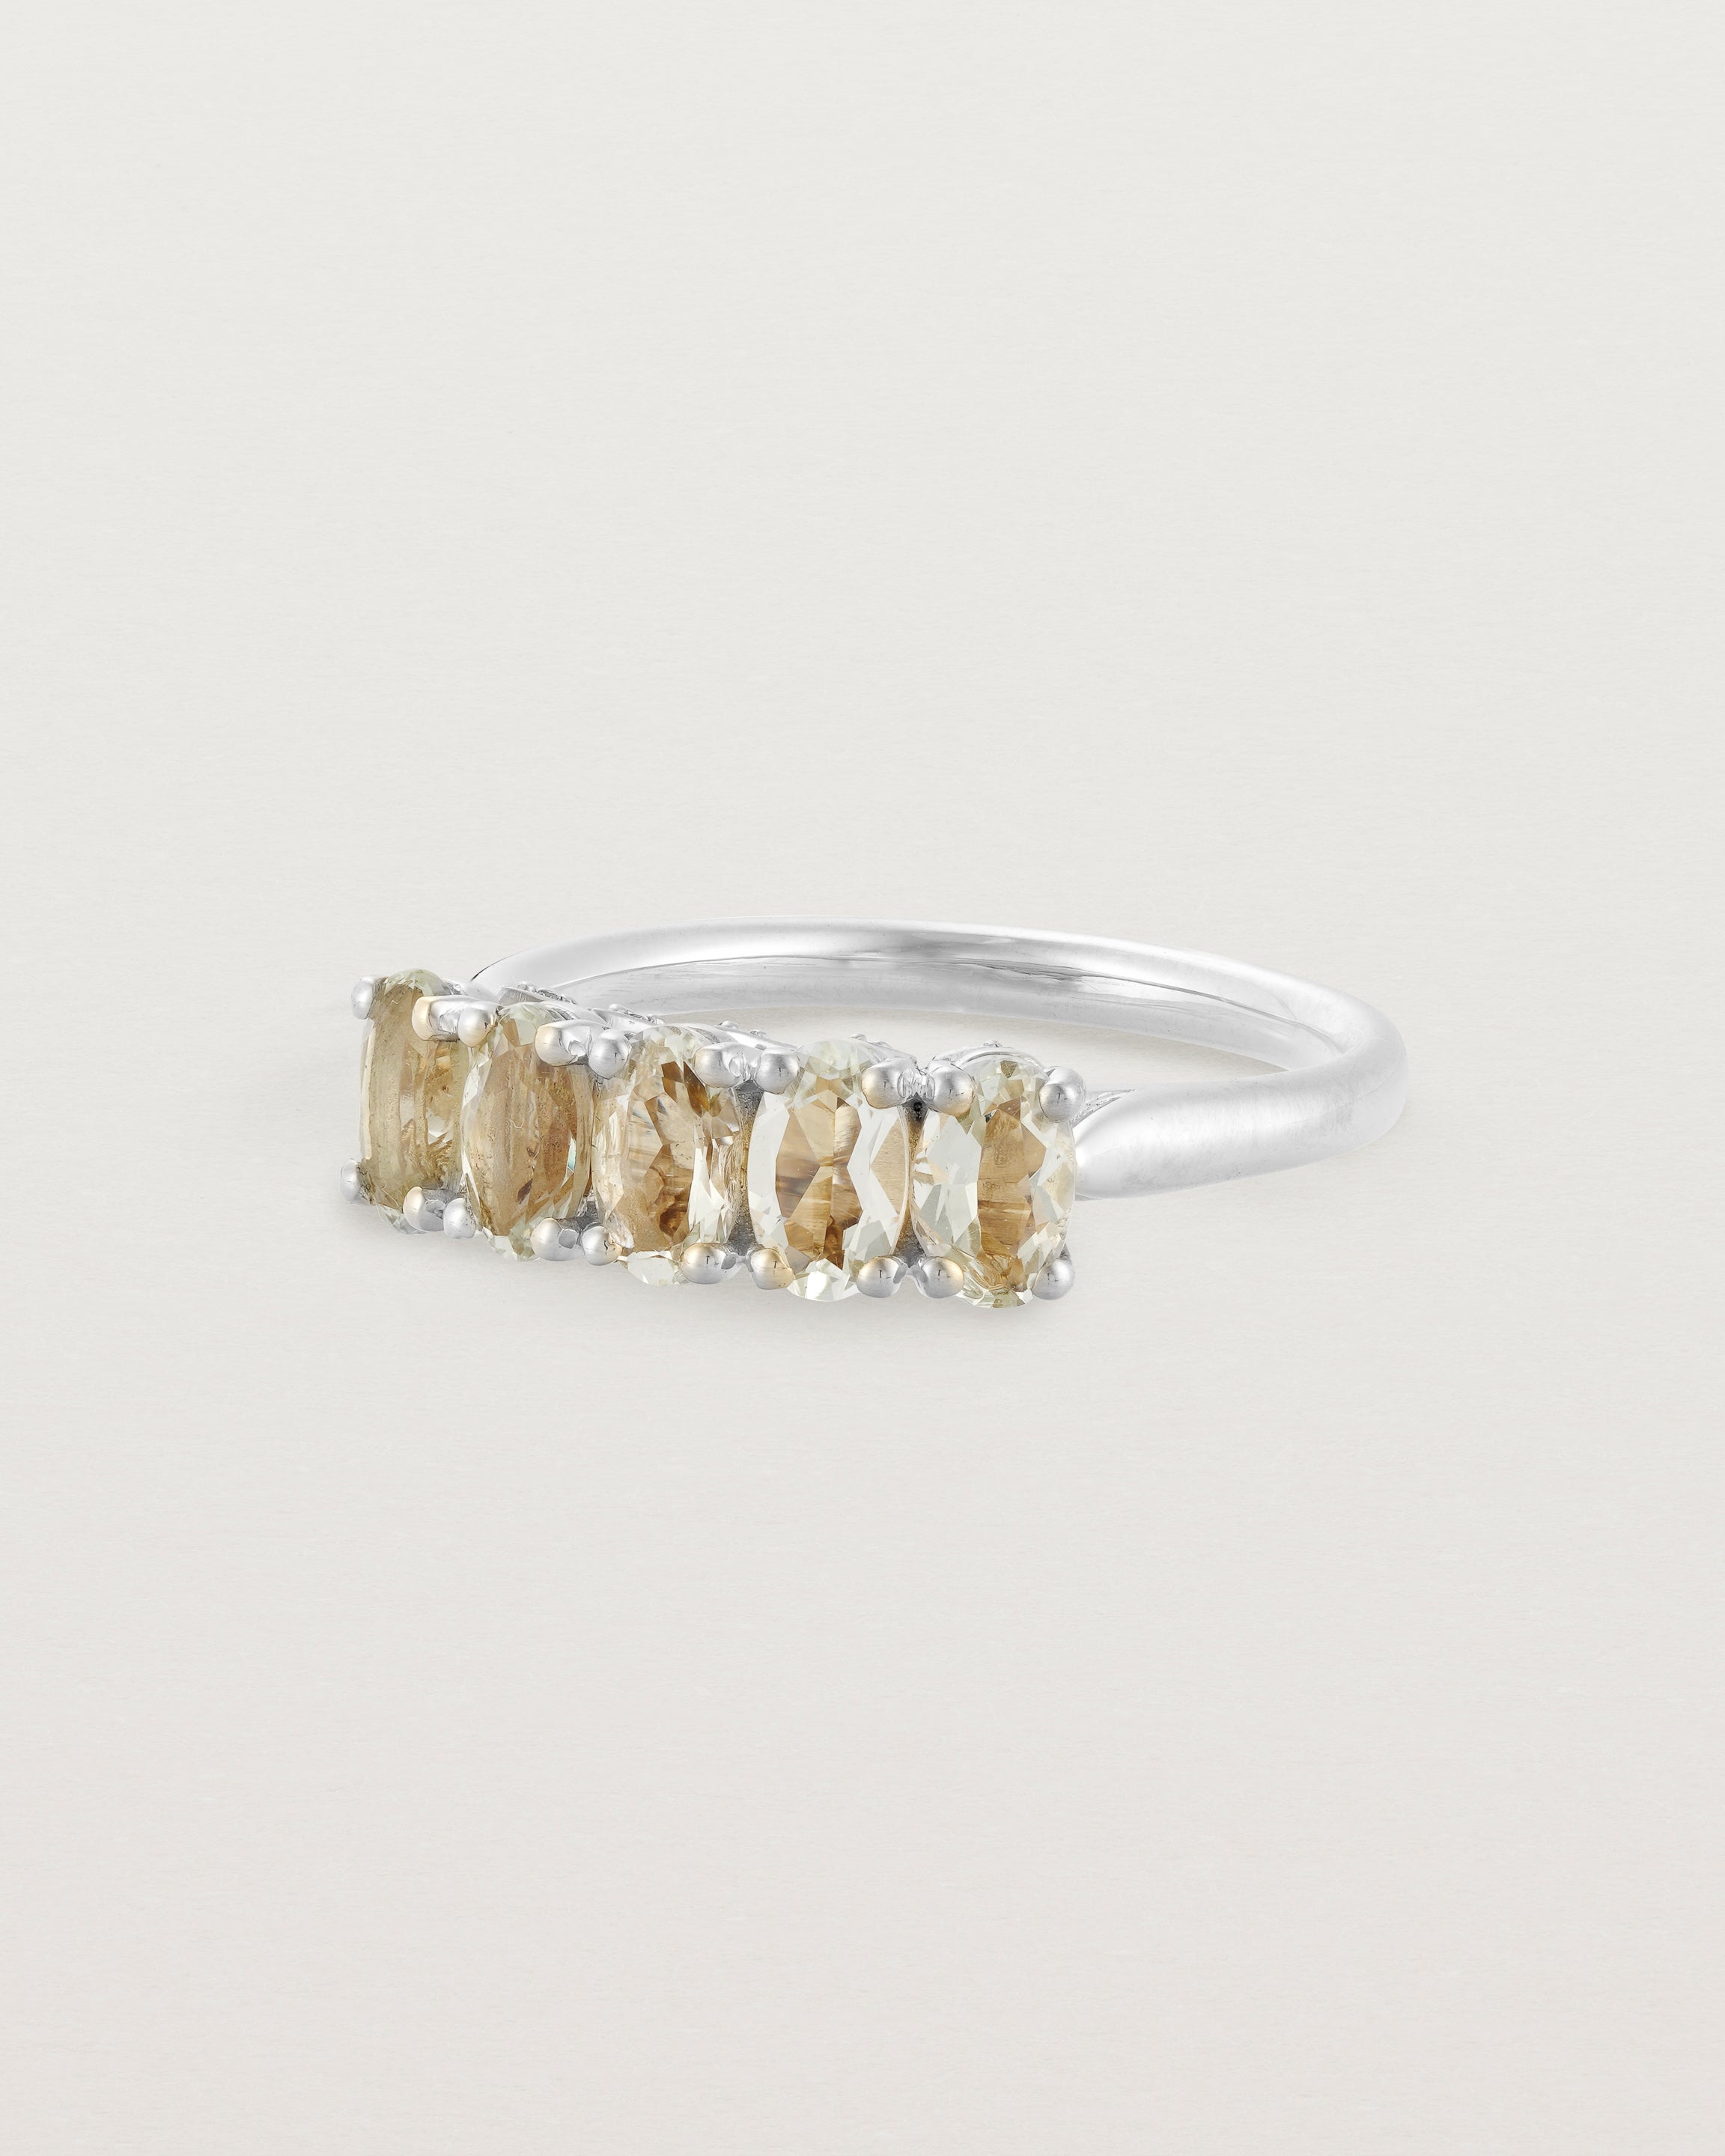 Standing view of the Fiore Wrap Ring | Green Amethyst | White Gold.